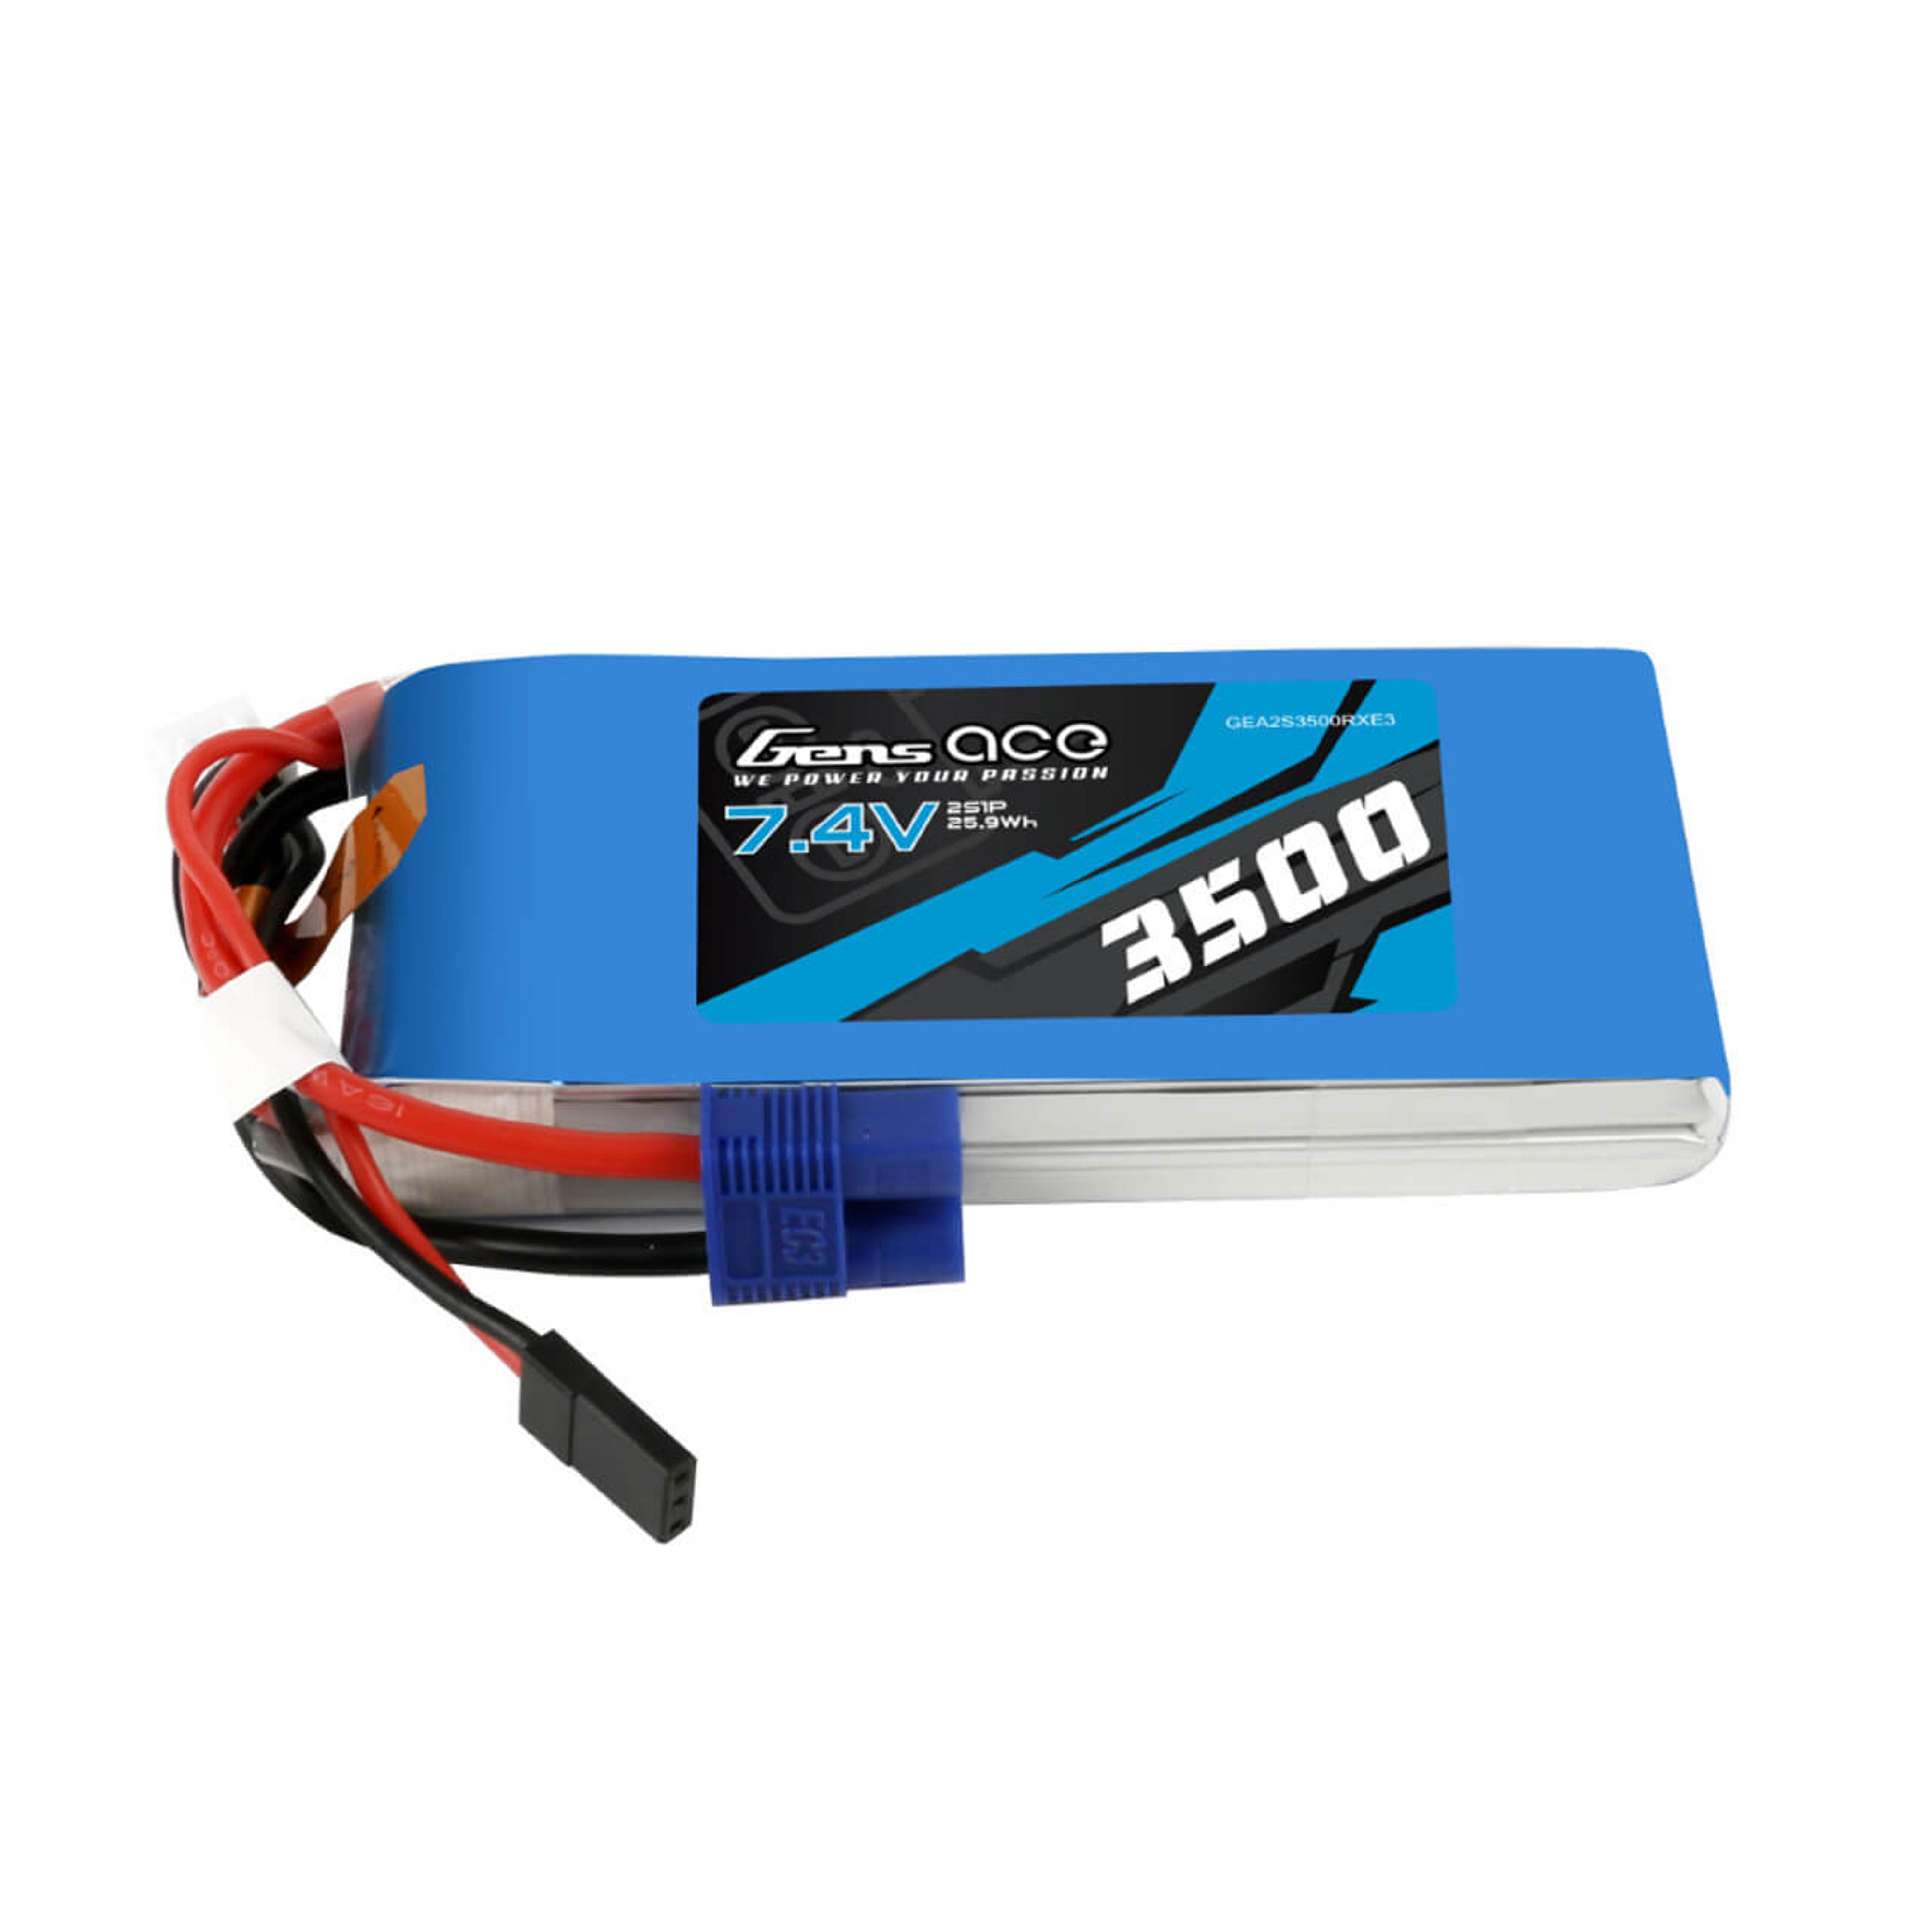 3500mAh 2S 7.4V RX Lipo Battery Pack with JR and EC3 Plug